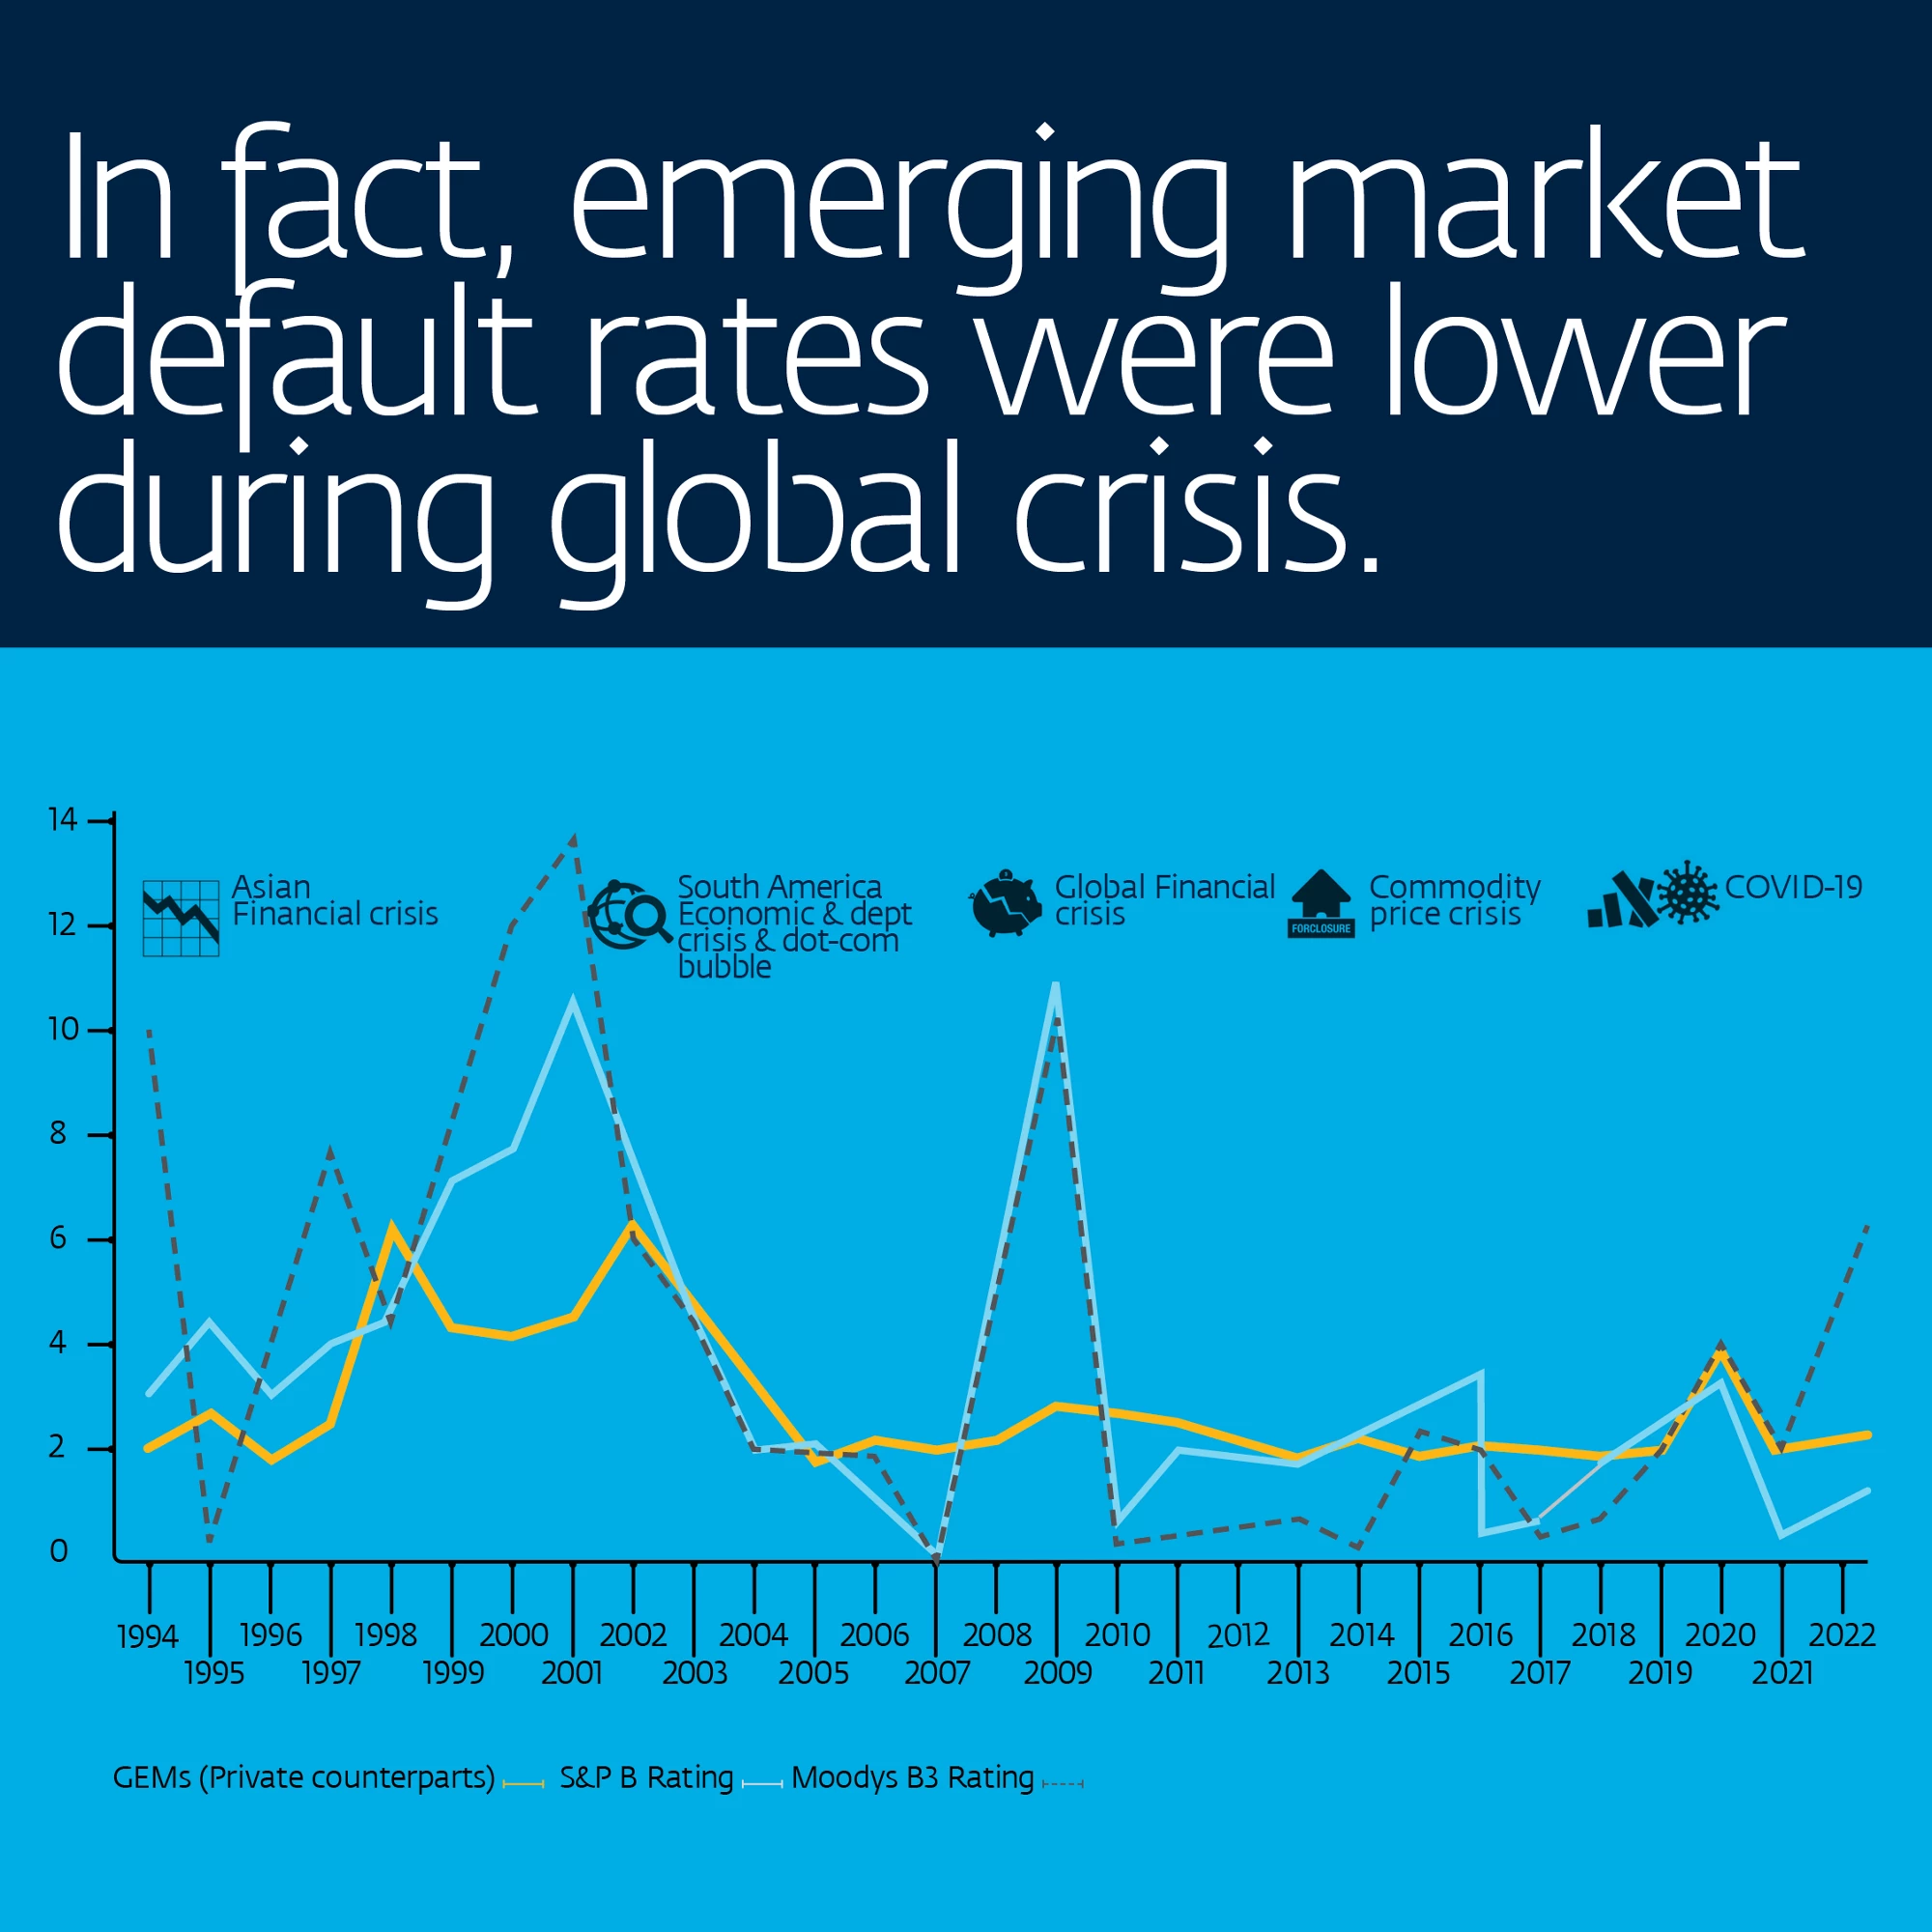 Chart showing that the emerging market default rates were lower during global crisis.